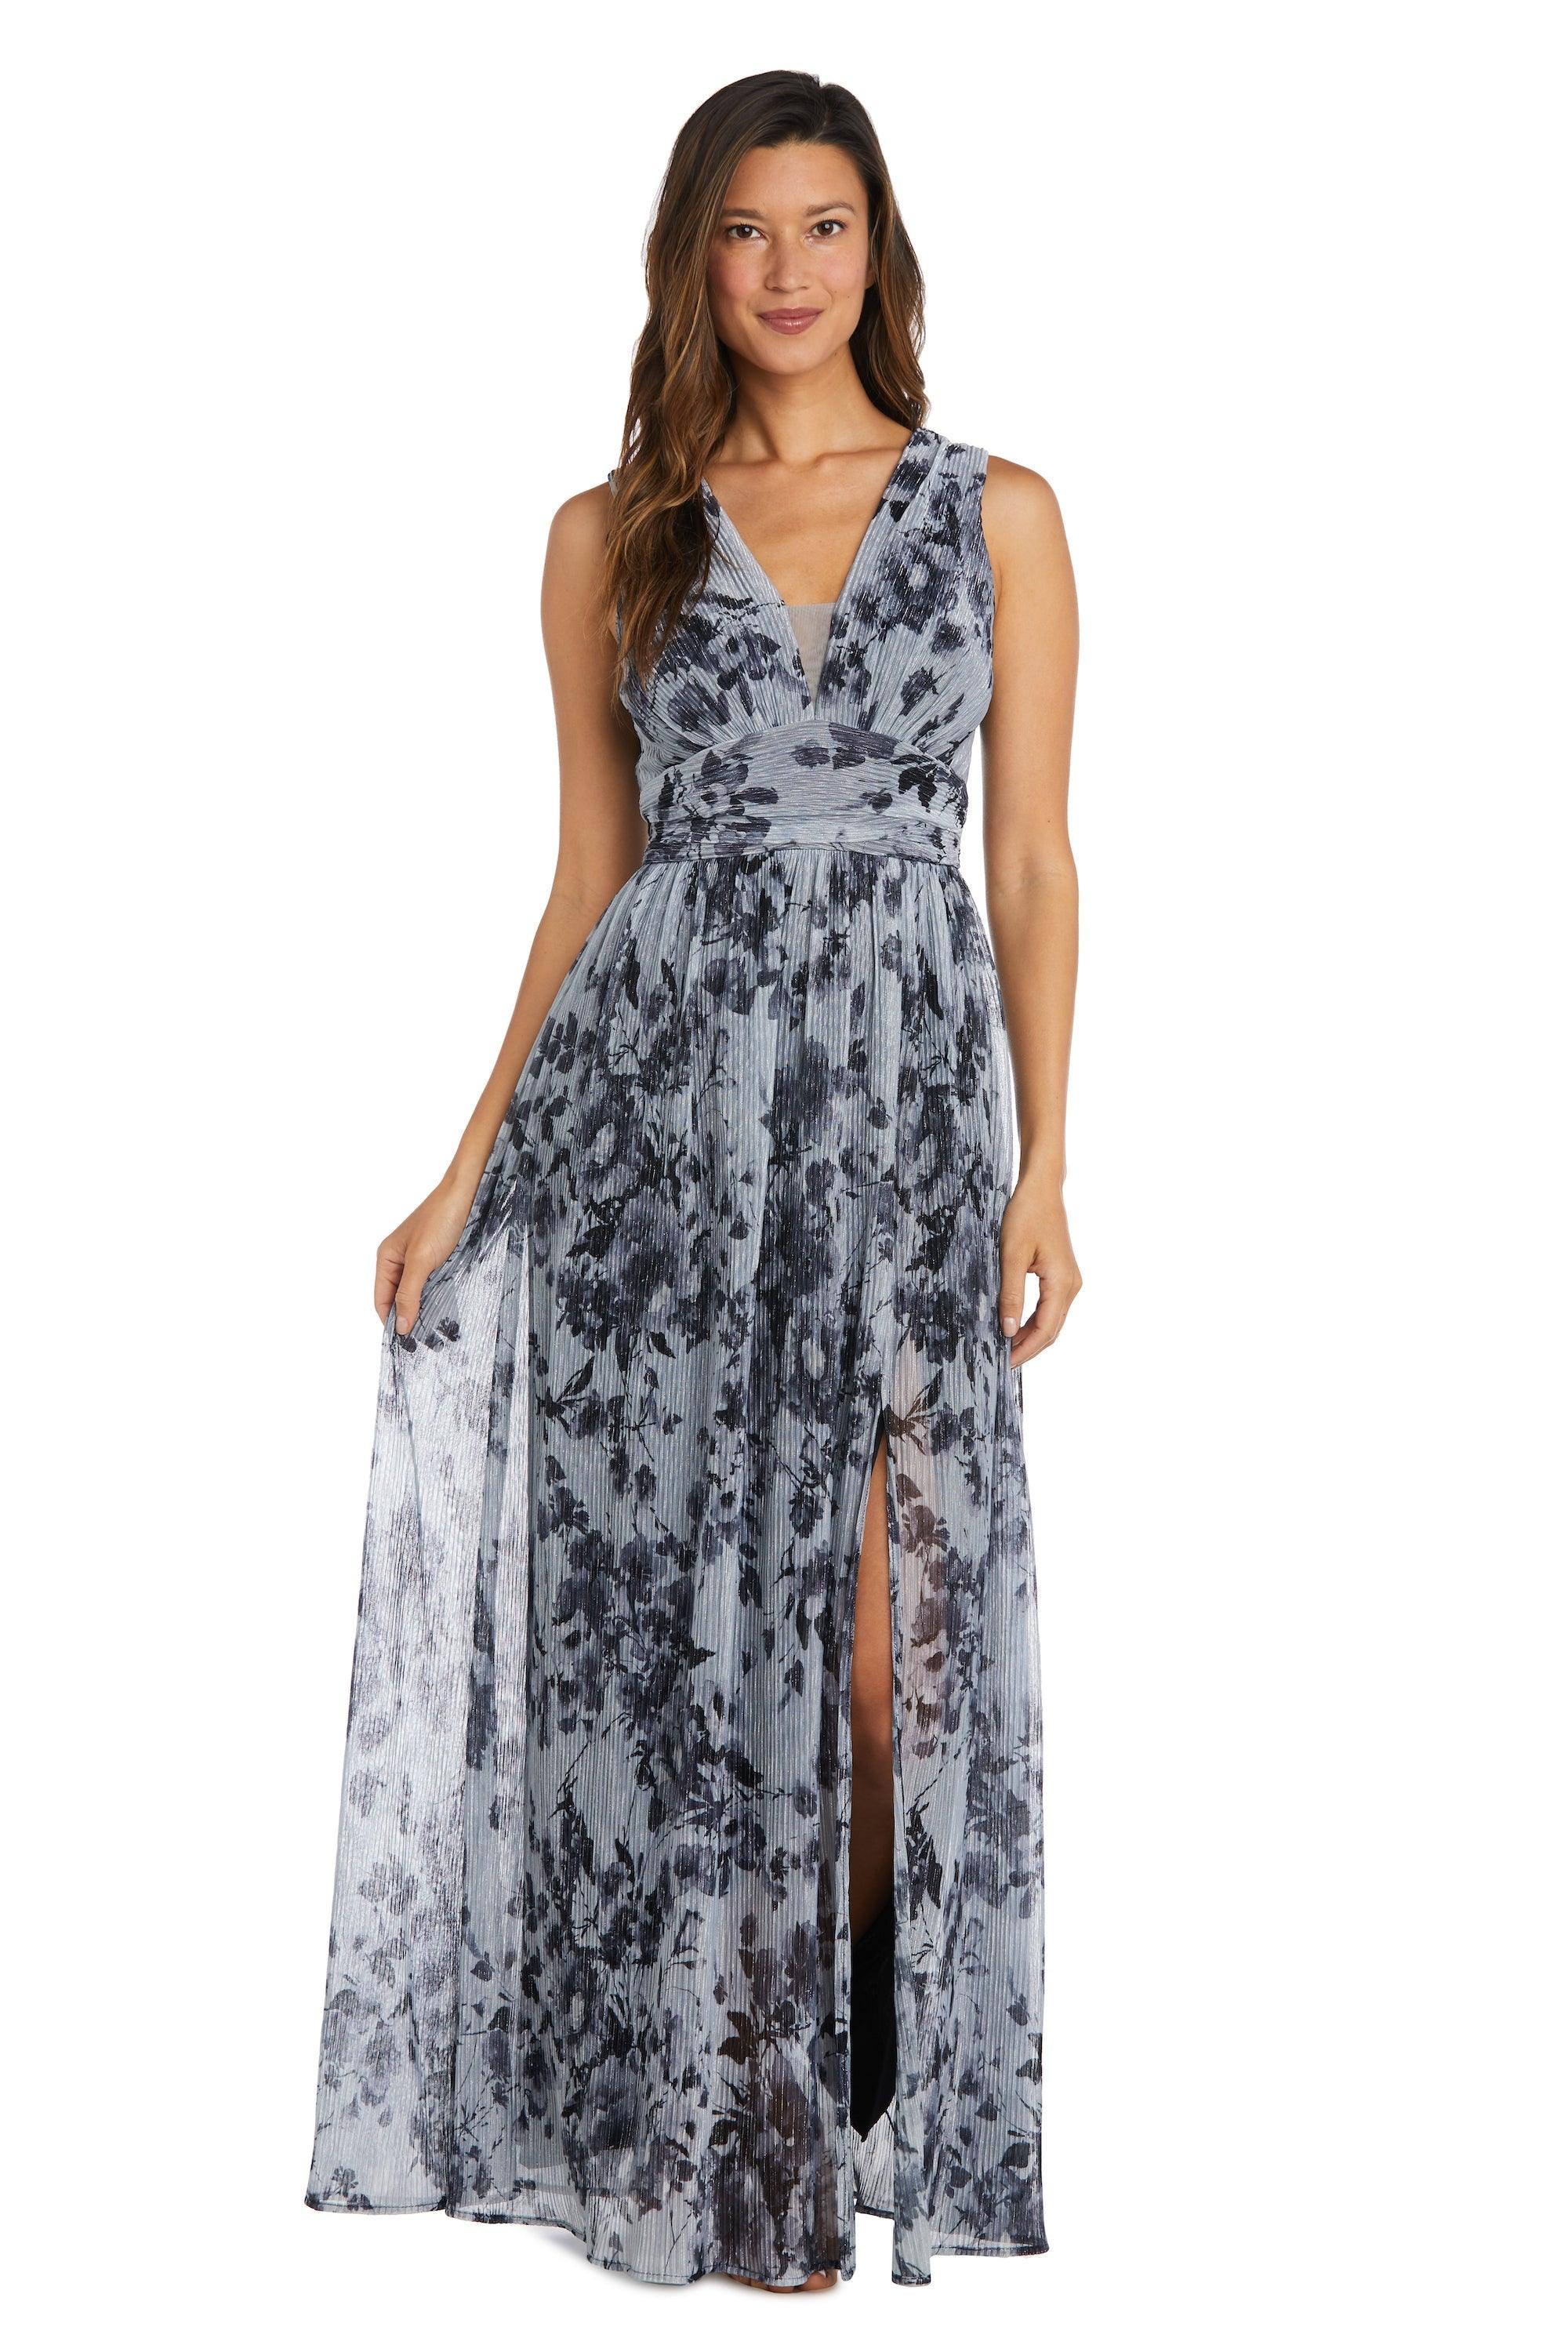 Nightway Long Formal Floral Print Dress 22042 - The Dress Outlet